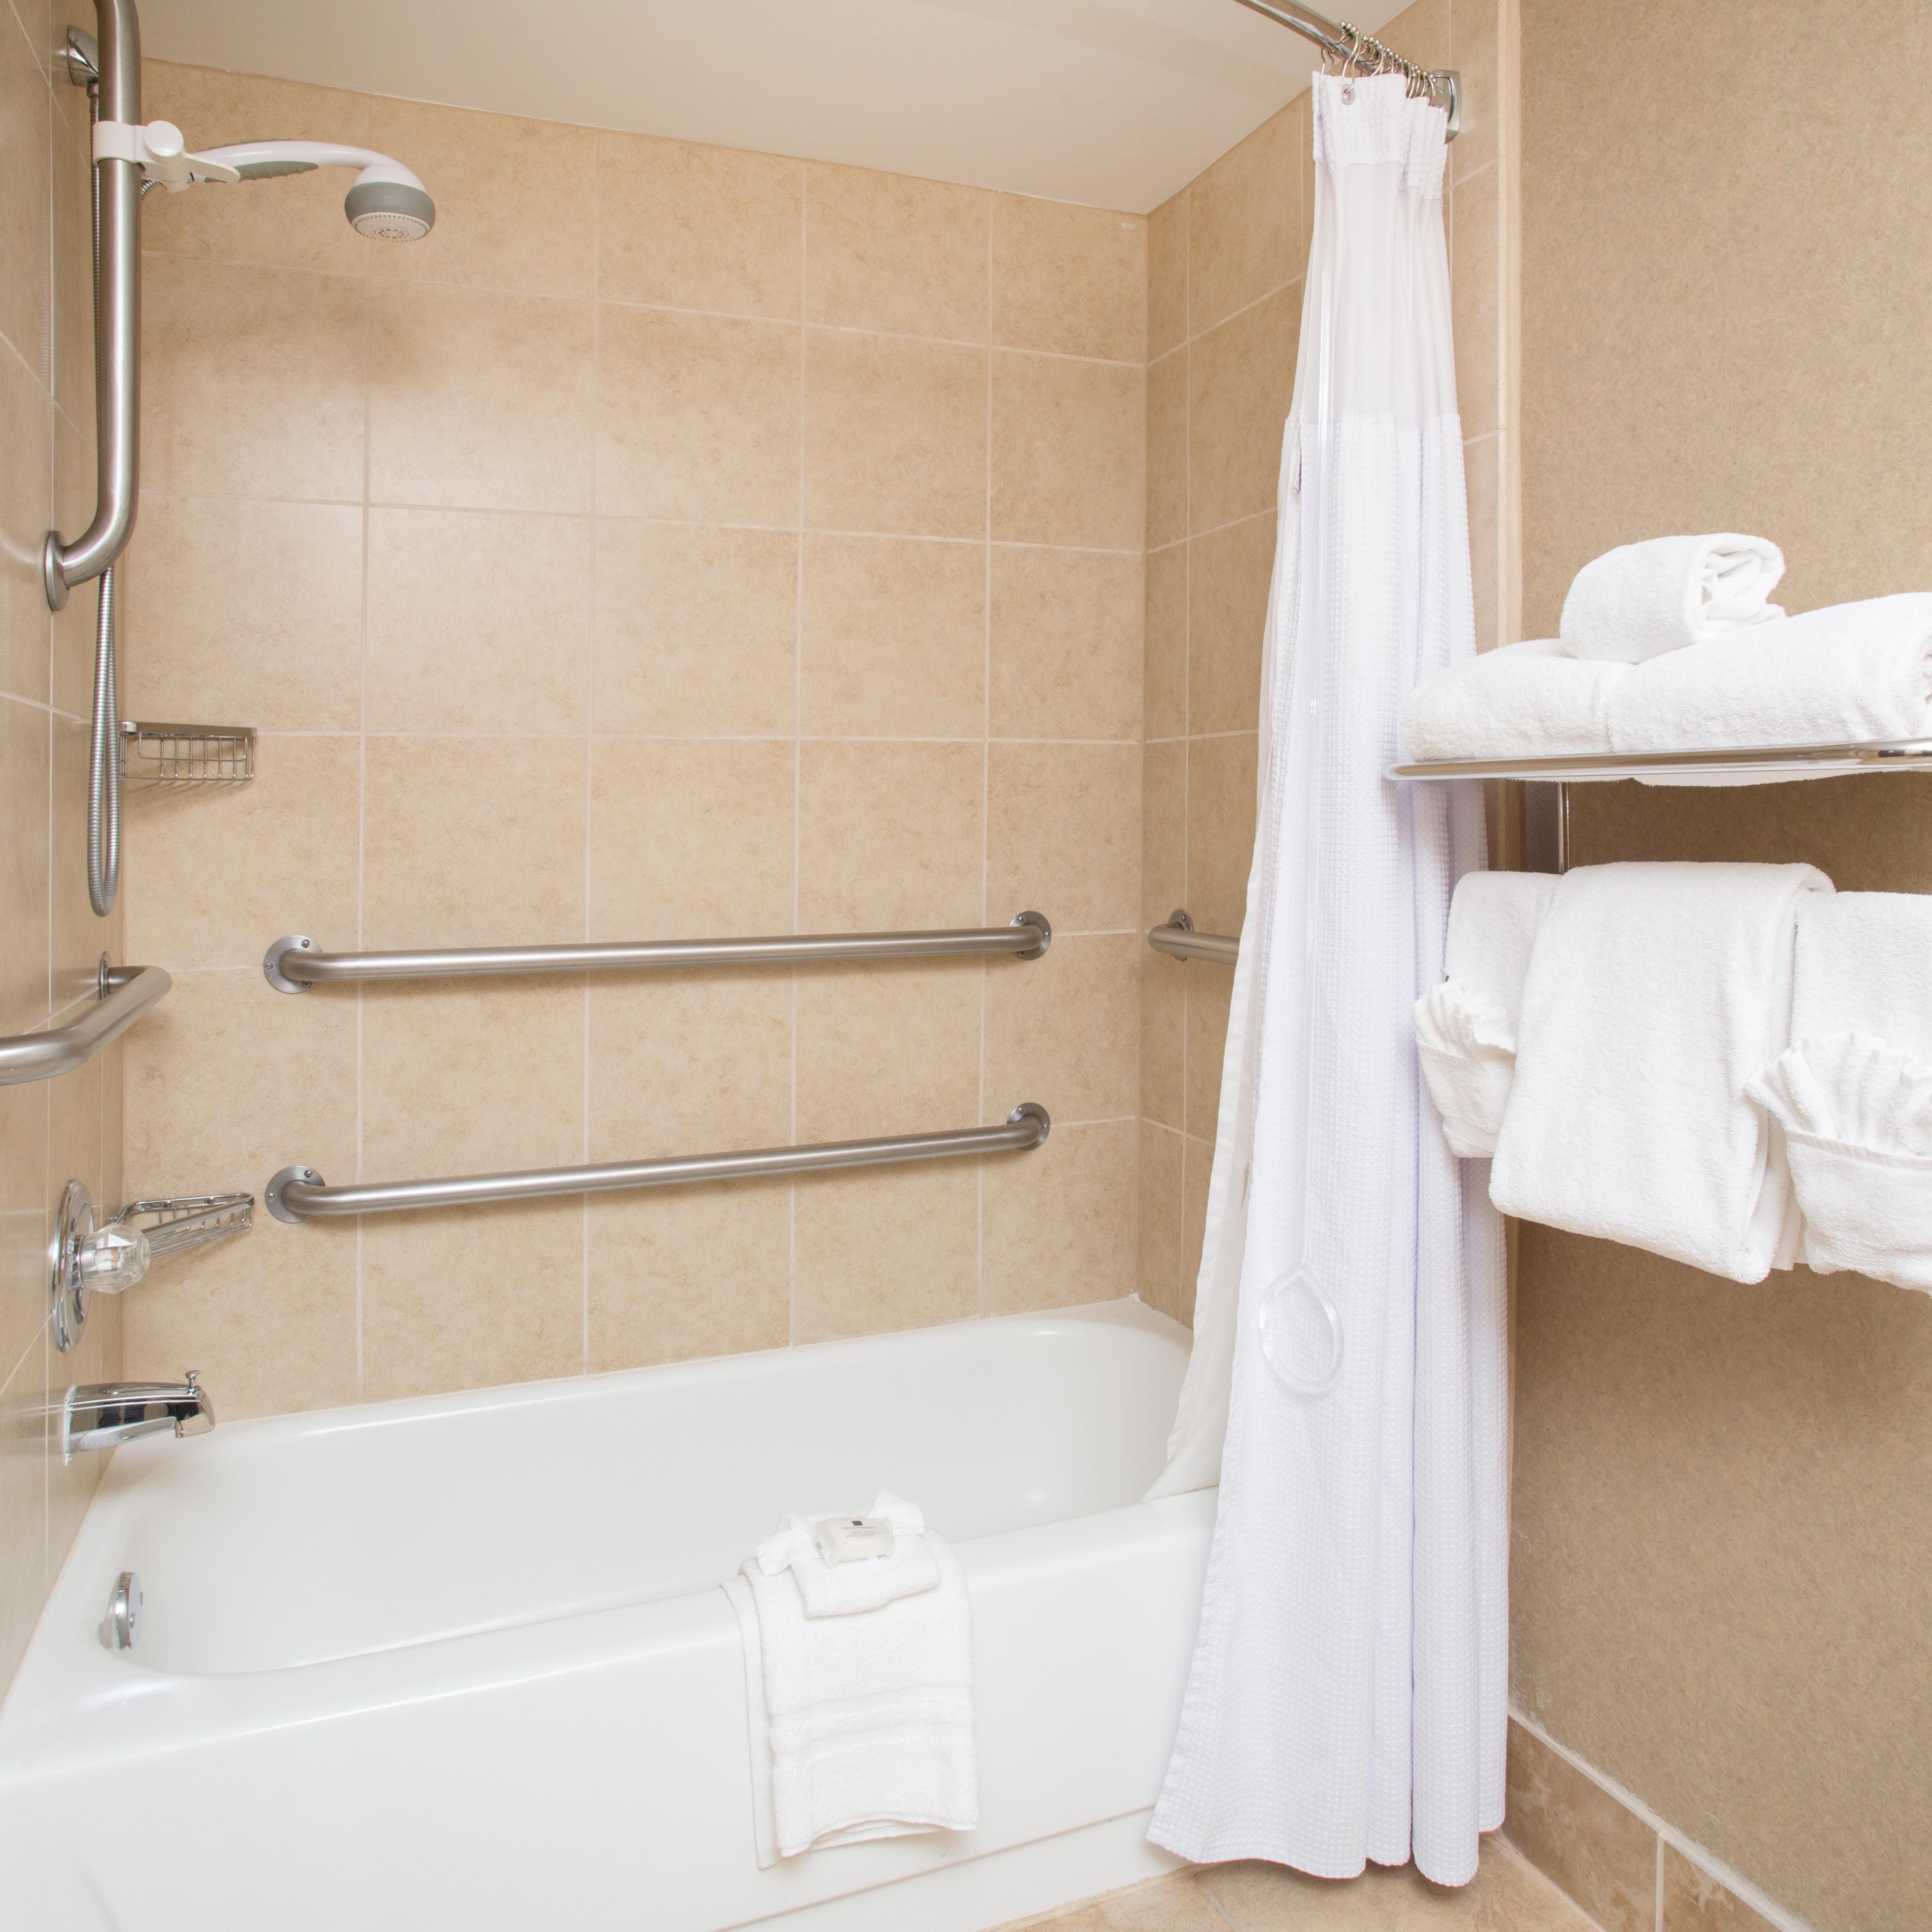 ADA/Handicap accessible Guest Bathroom with mobility tub.